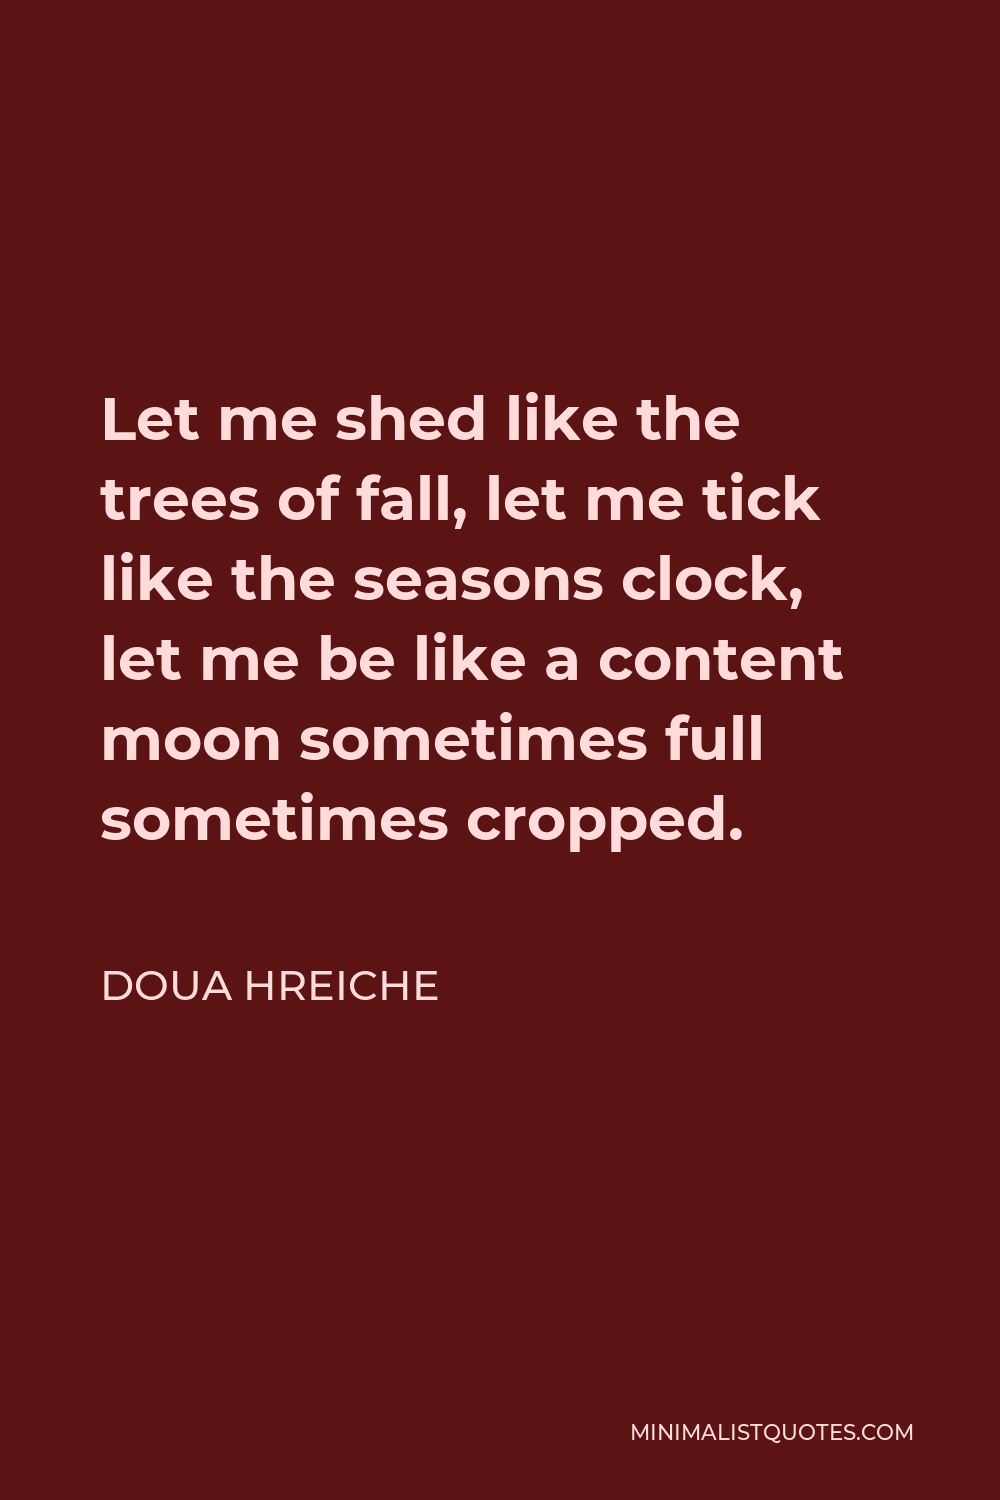 Doua Hreiche Quote - Let me shed like the trees of fall, let me tick like the seasons clock, let me be like a content moon sometimes full sometimes cropped.